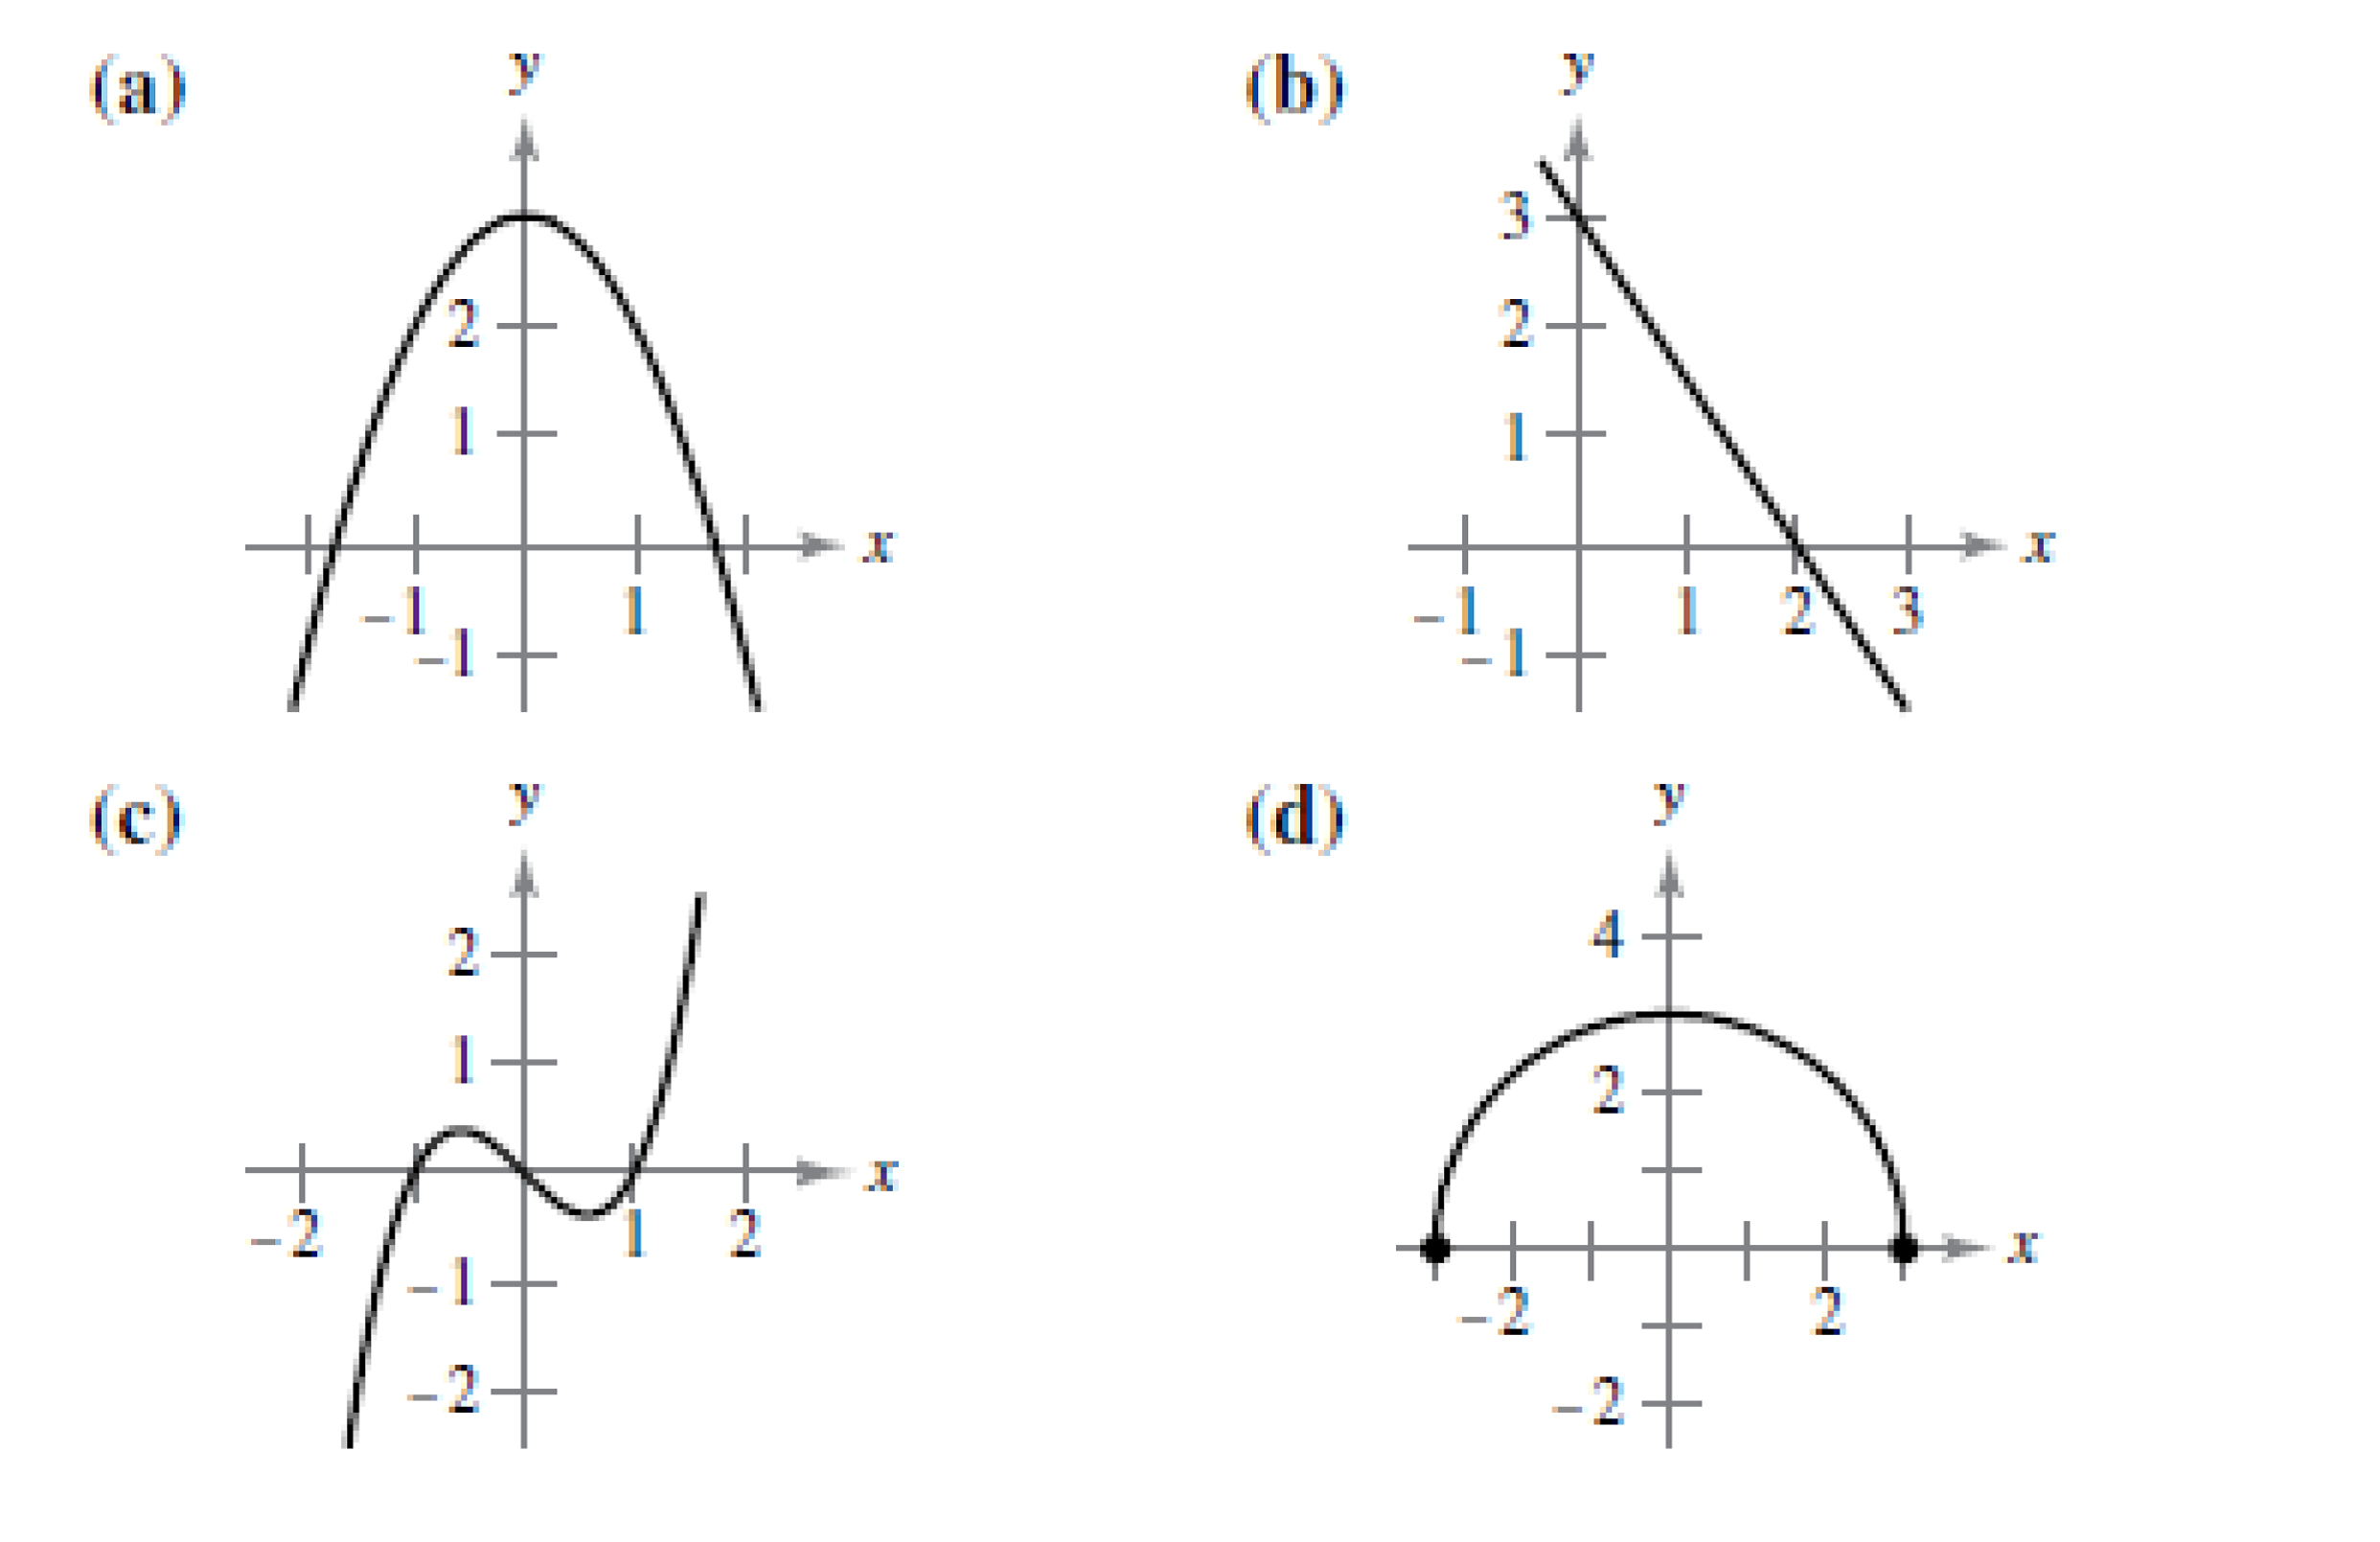 Chapter P.1, Problem 3E, Matching In Exercises 3-6, match the equation with its graph. [The graphs are labeled (a), (b). (c), 